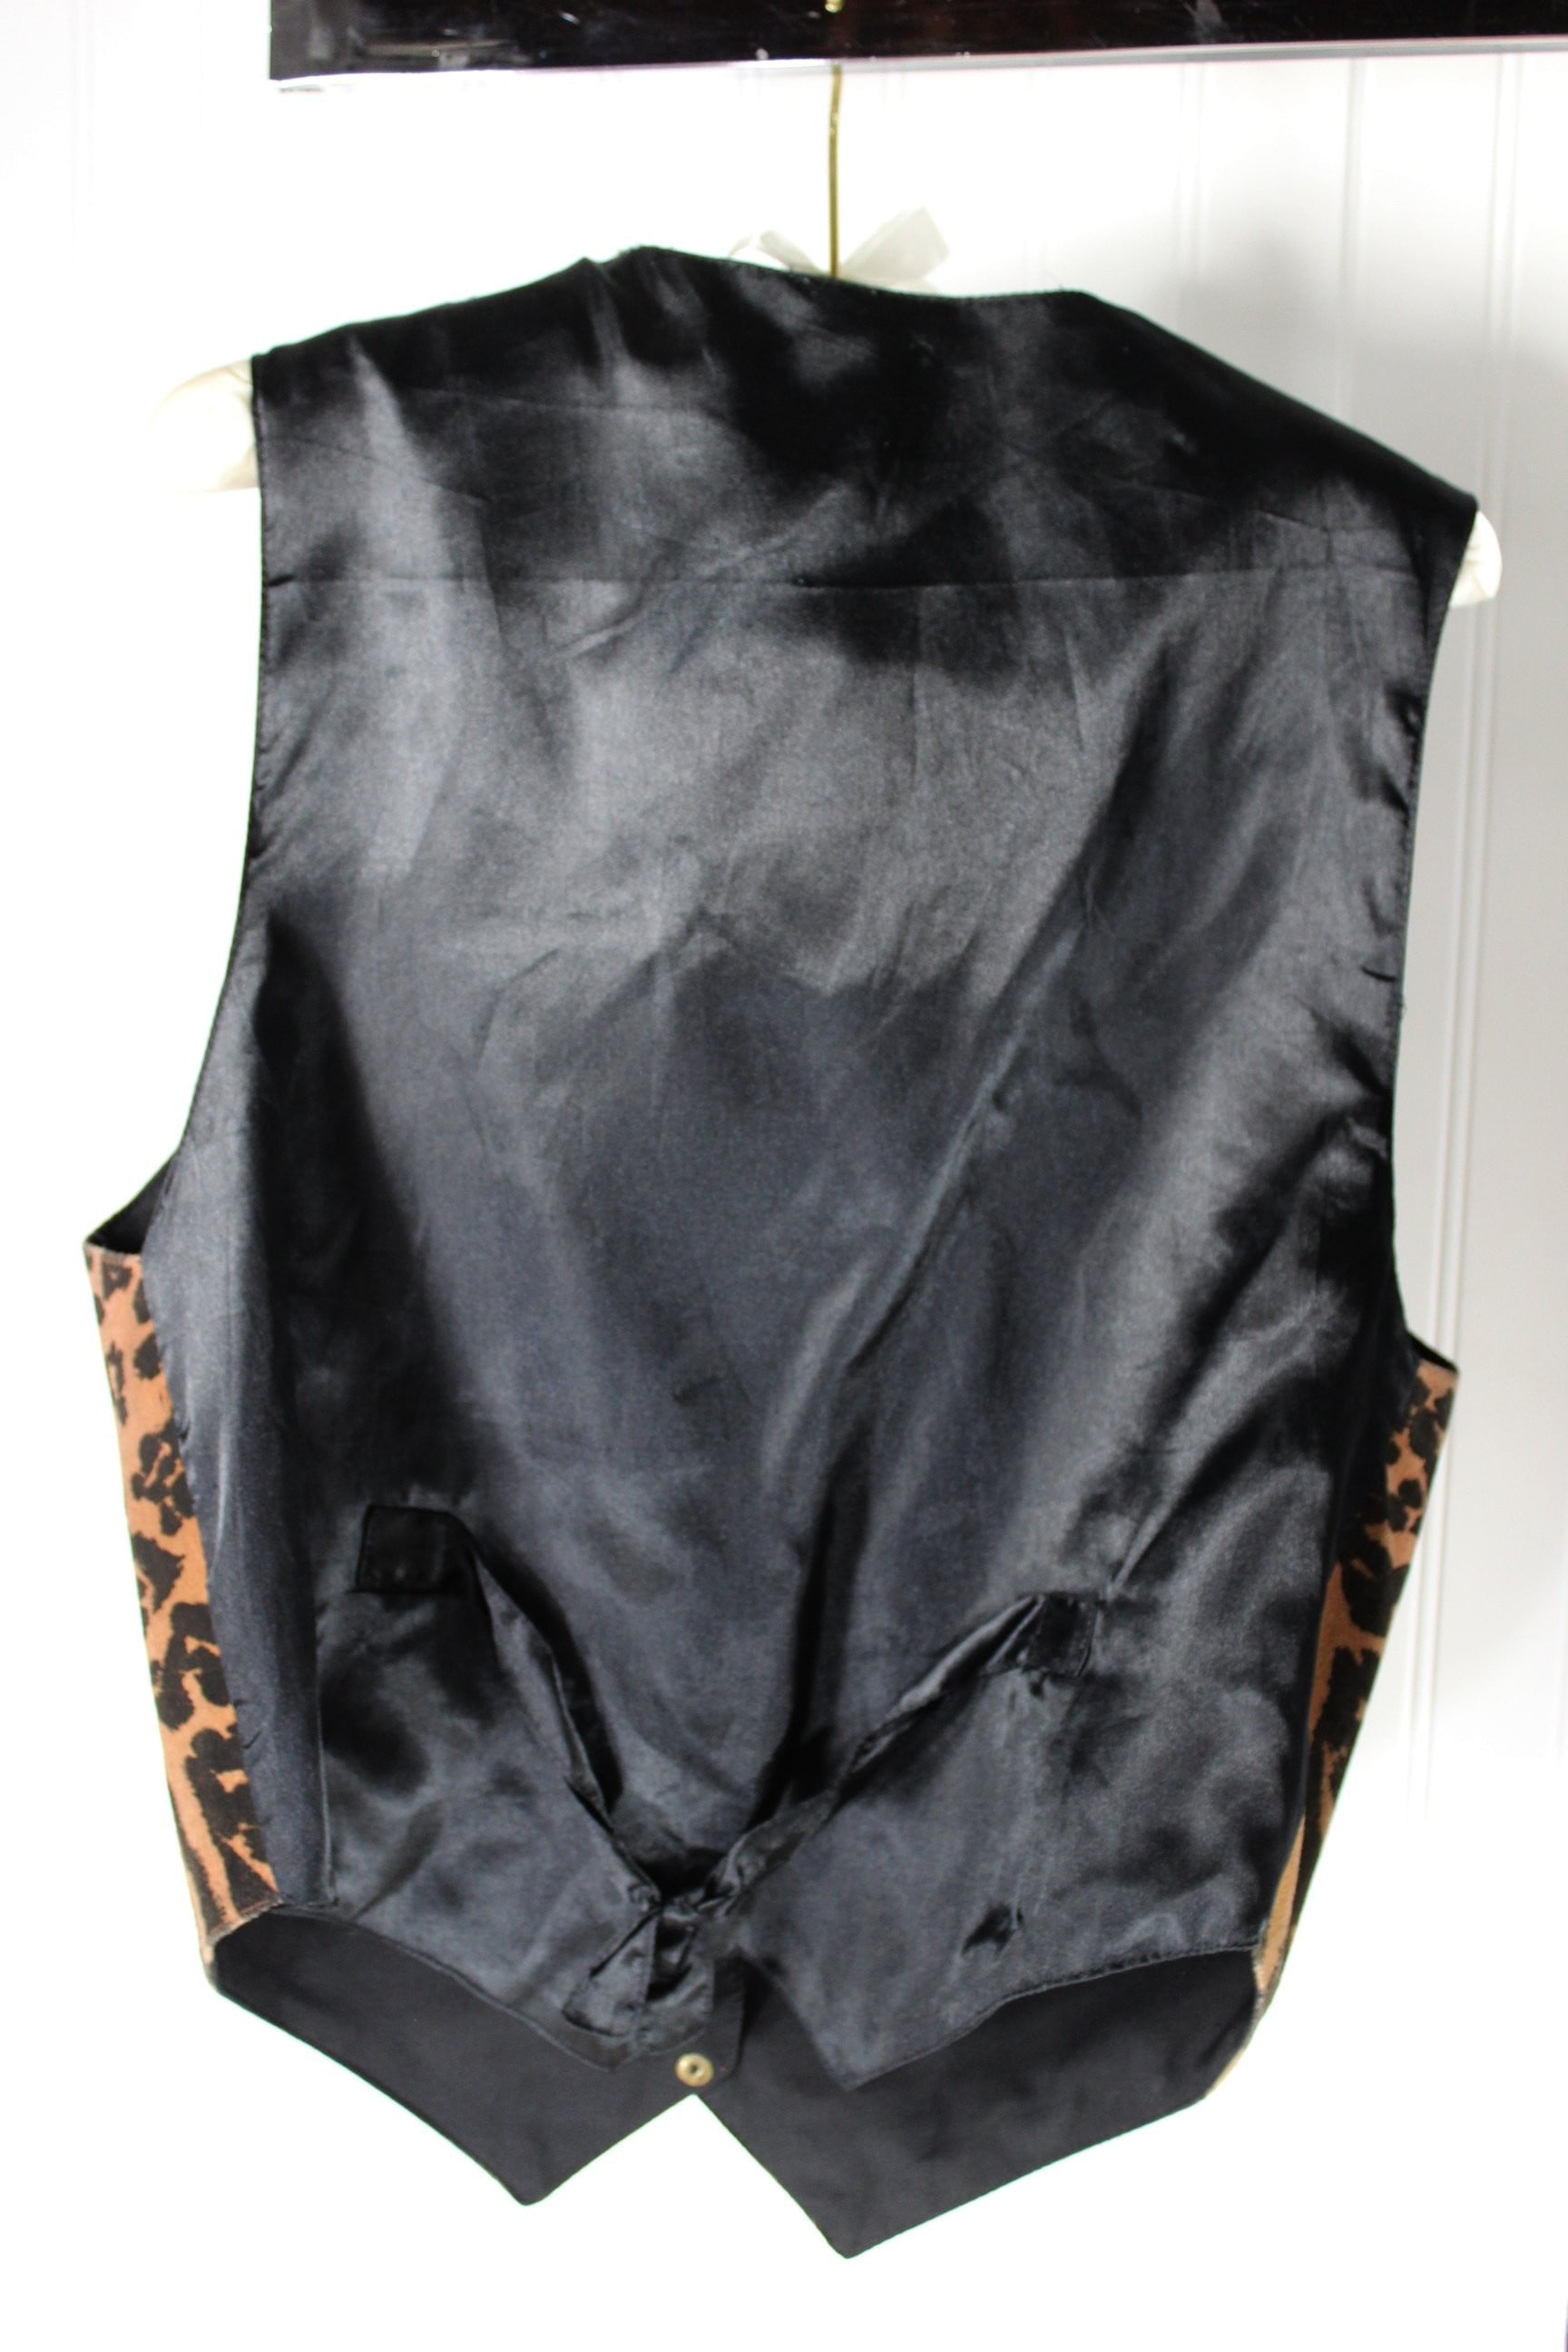 Suede Leather Vest Leopard Print AGAPO Snaps Oklahoma 1907 Seal Replica cool